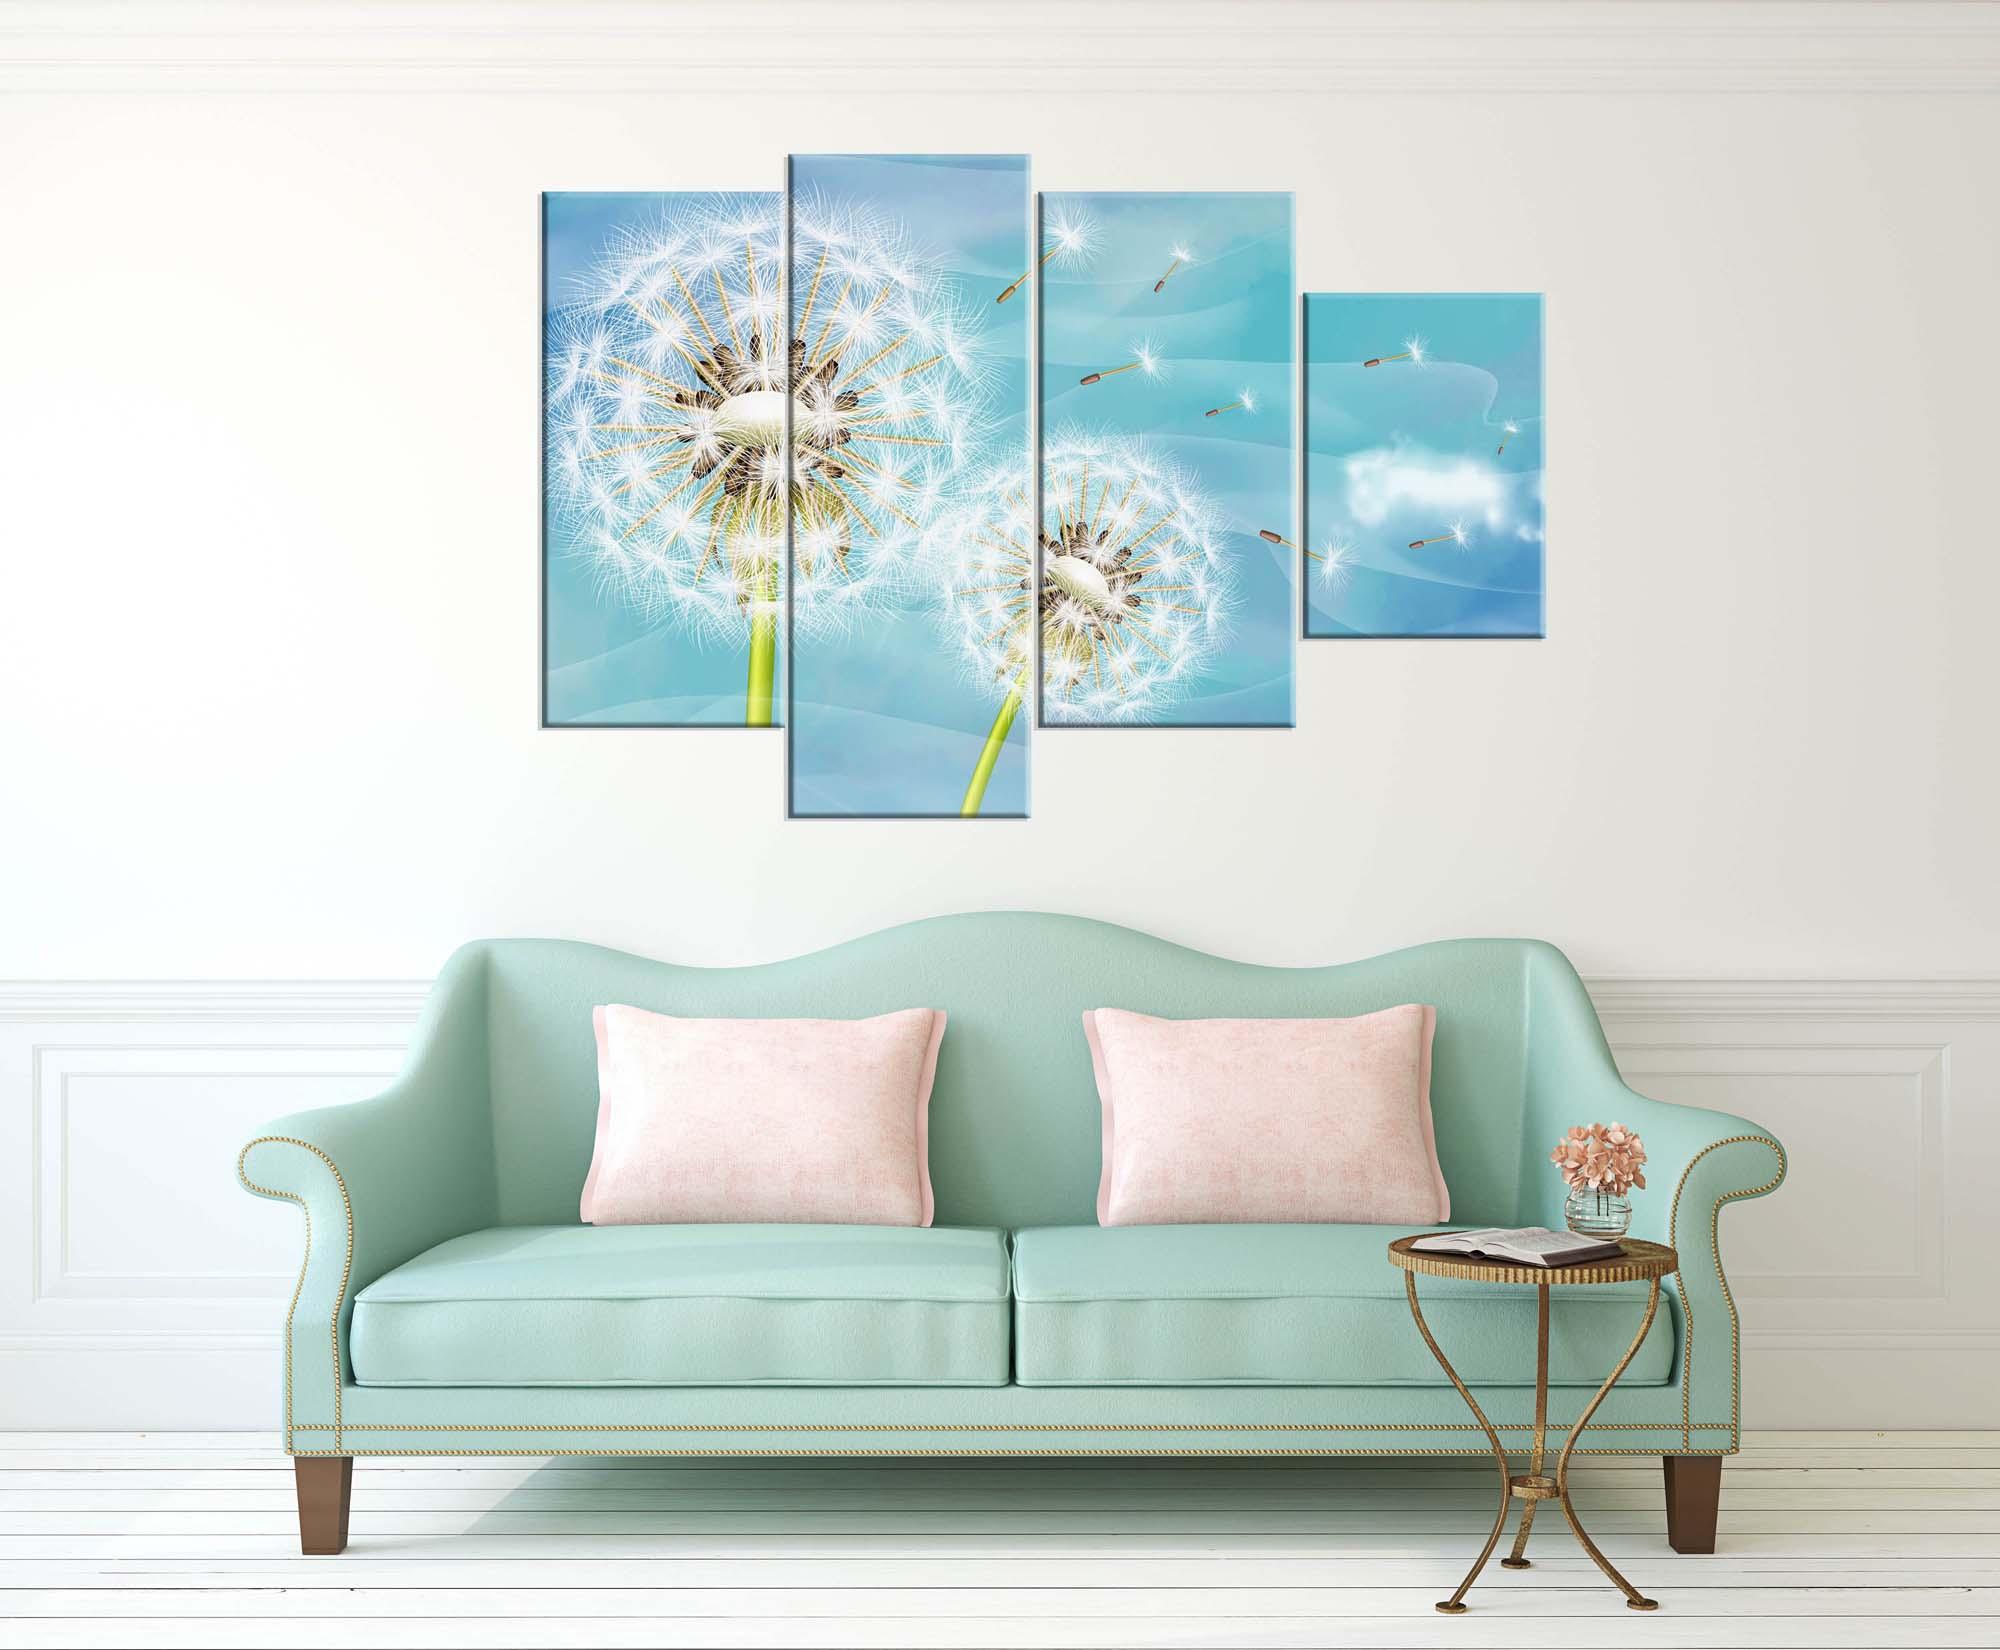 Picture Modular picture - dandelions against the sky 2